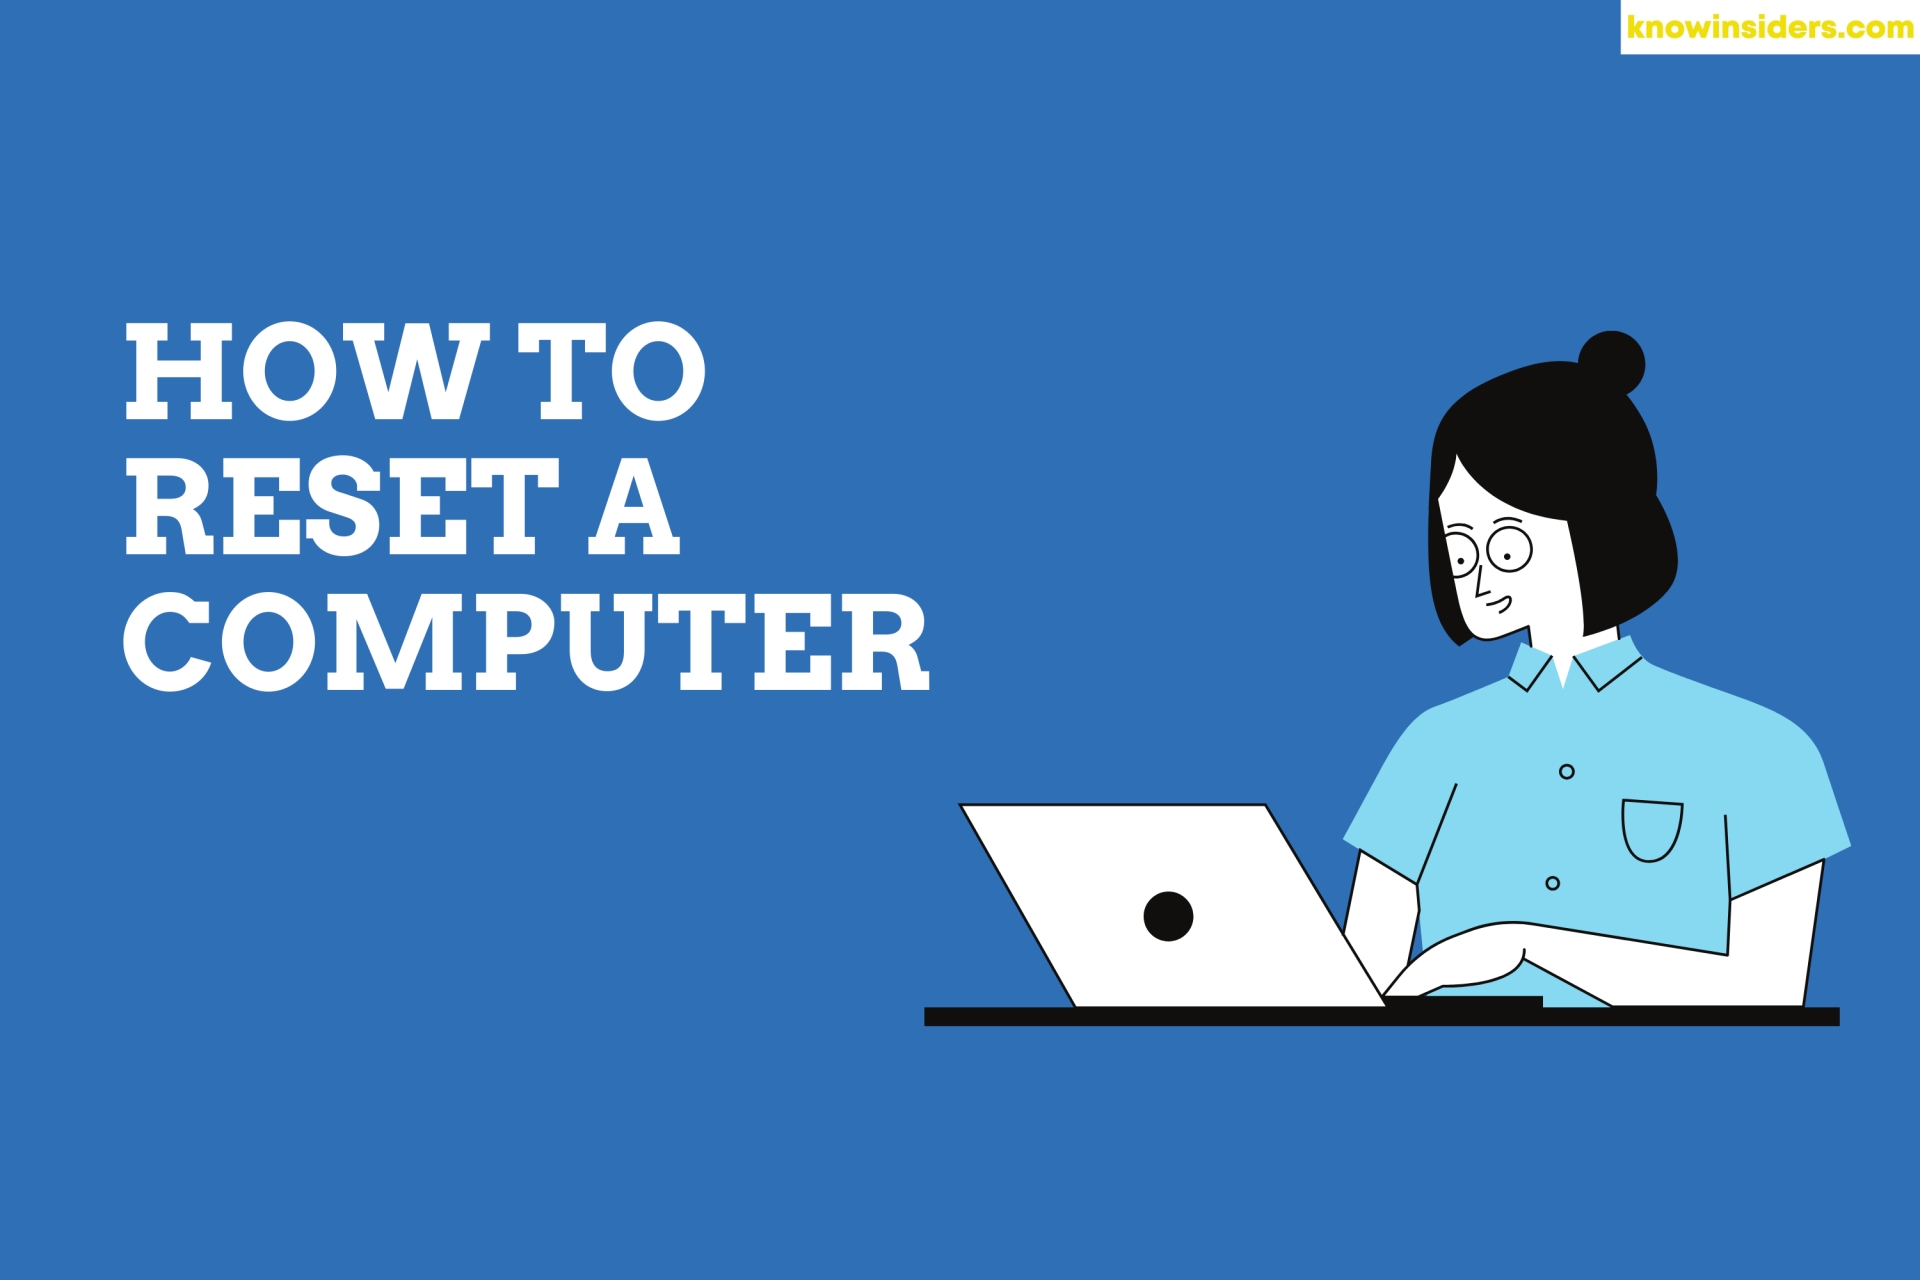 How To Reset Your Computer With The Simpliest Ways?